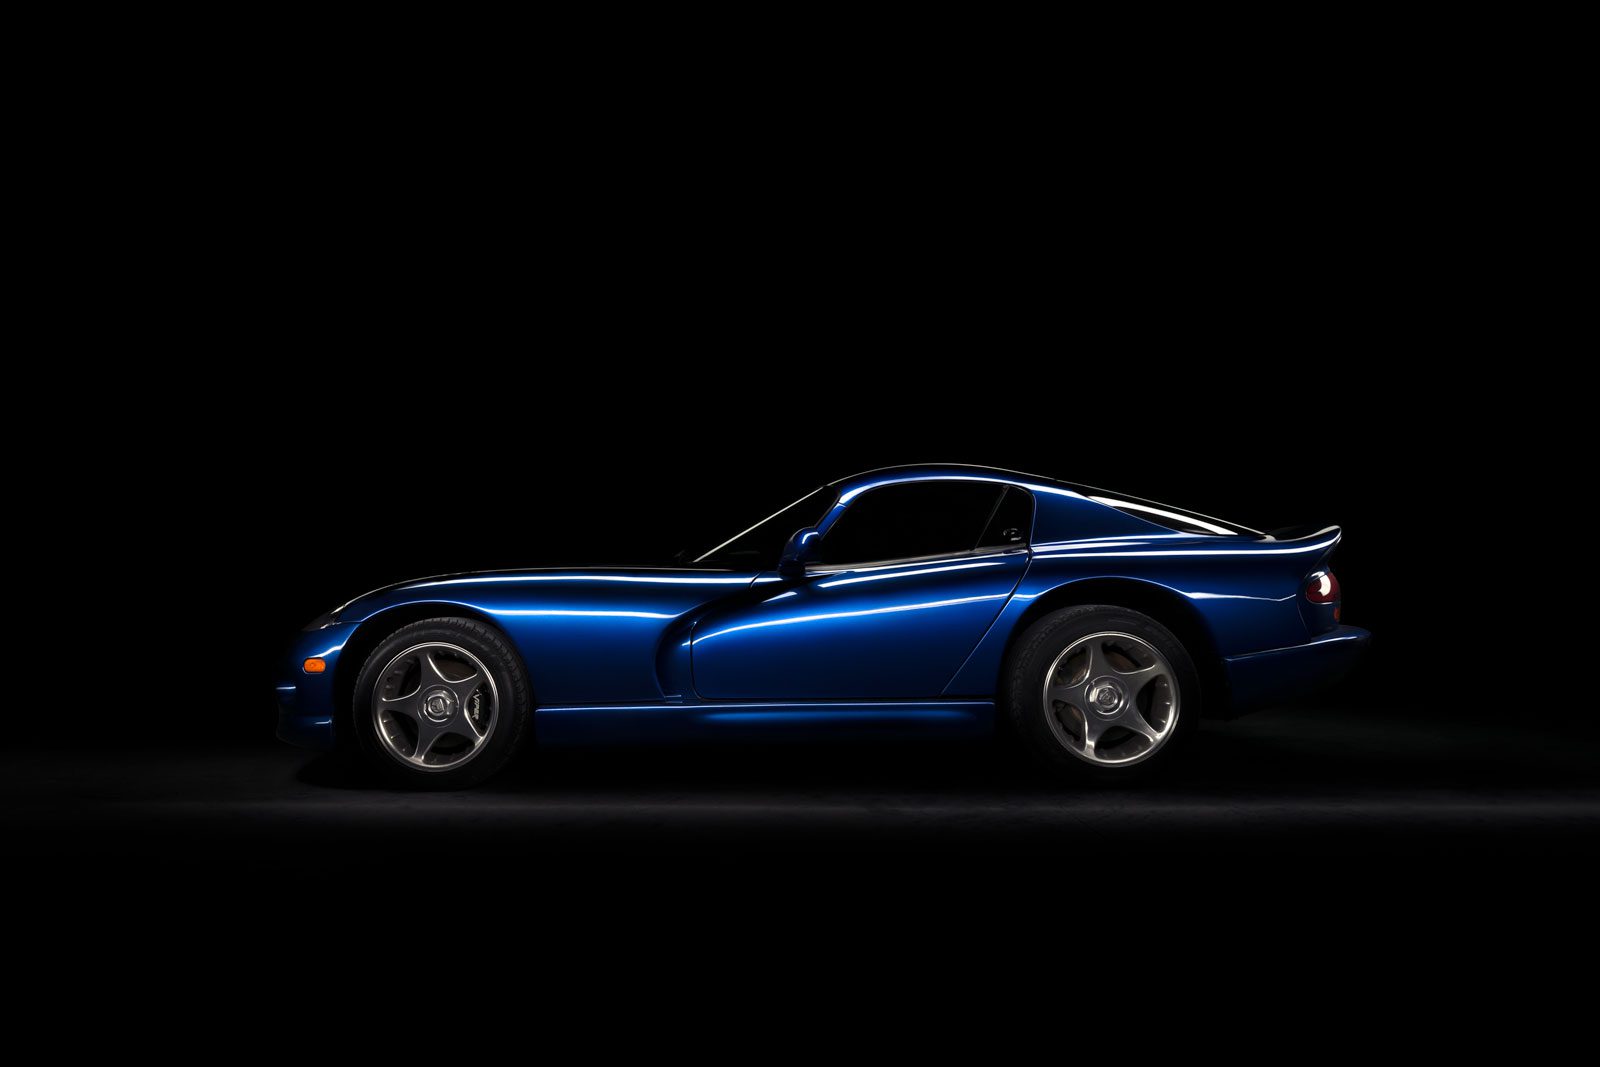 Blue Dodge Viper GTS side photo by schaefer photography